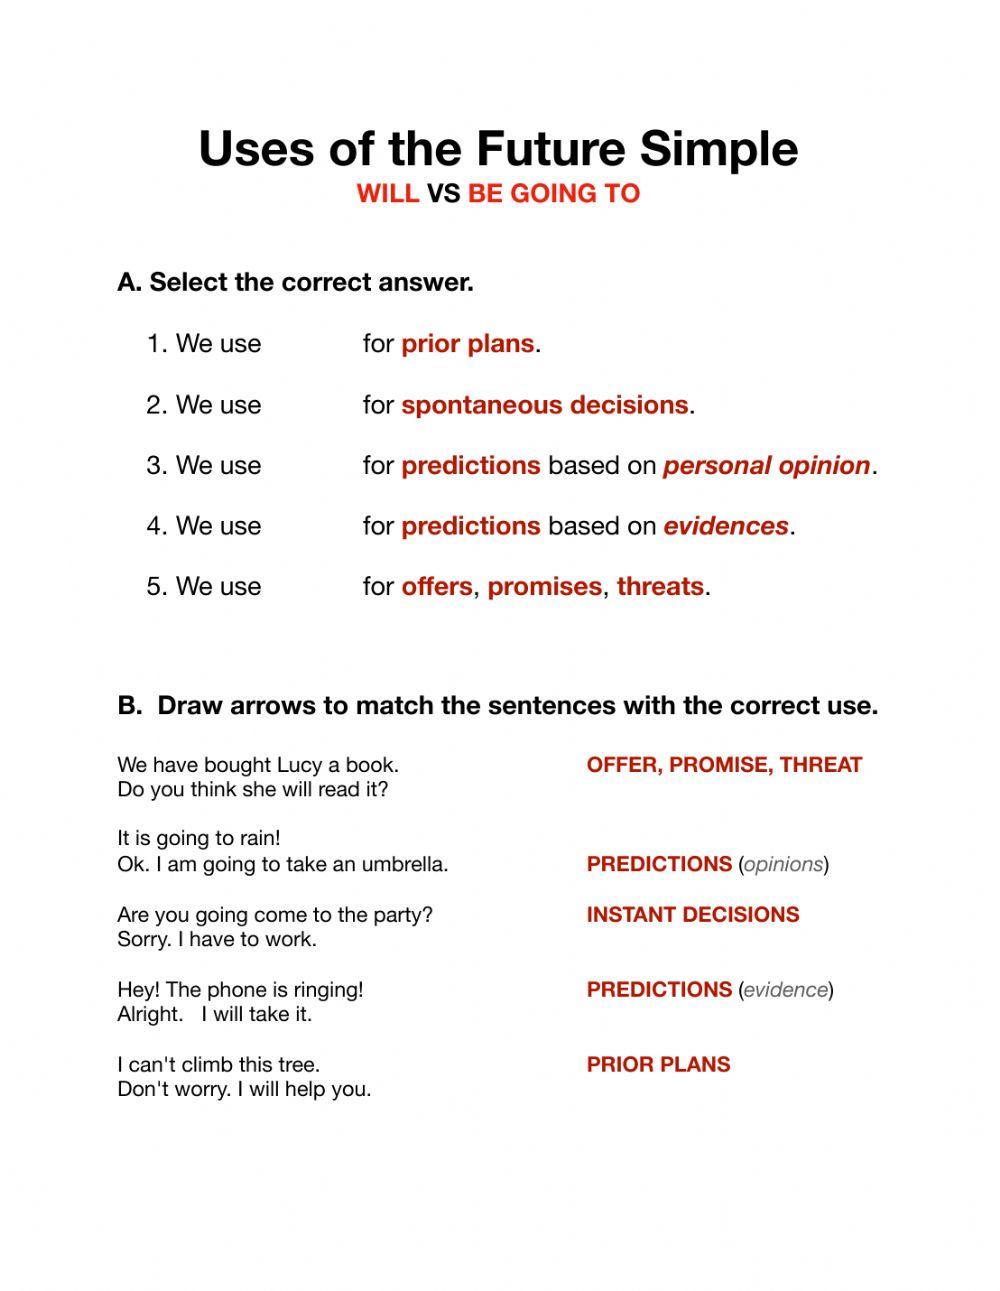 Uses of the Future Simple (Will - Be Going To)